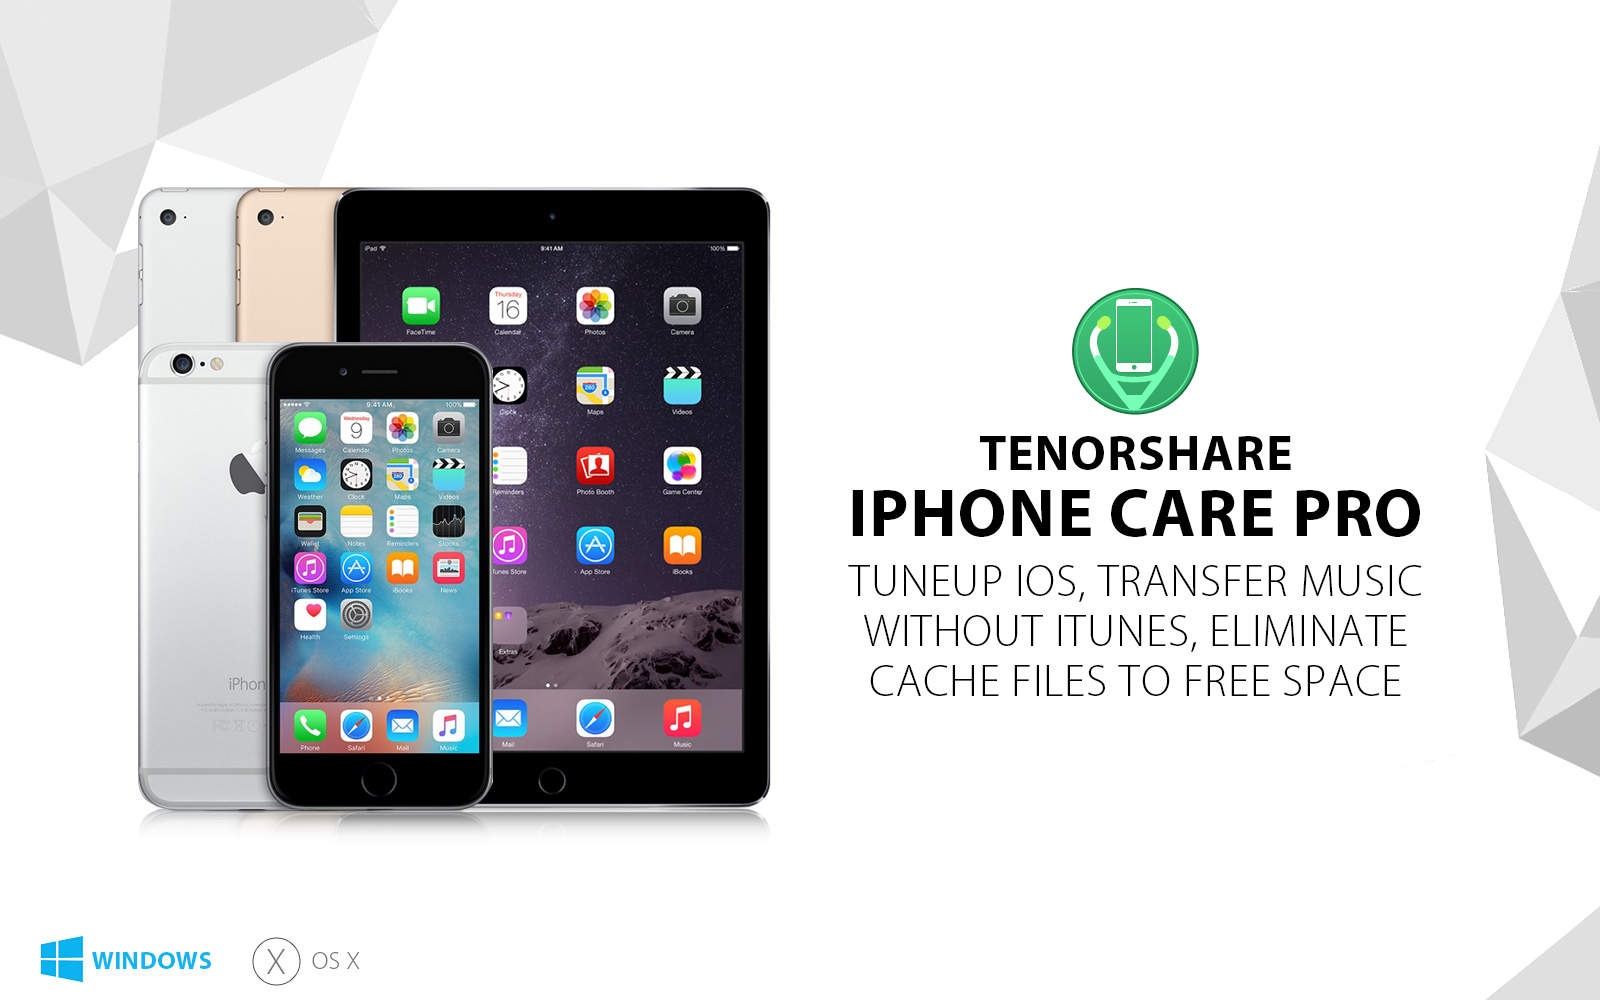 iPhone Care Pro does what iTunes does for our iOS devices, only better and easier.